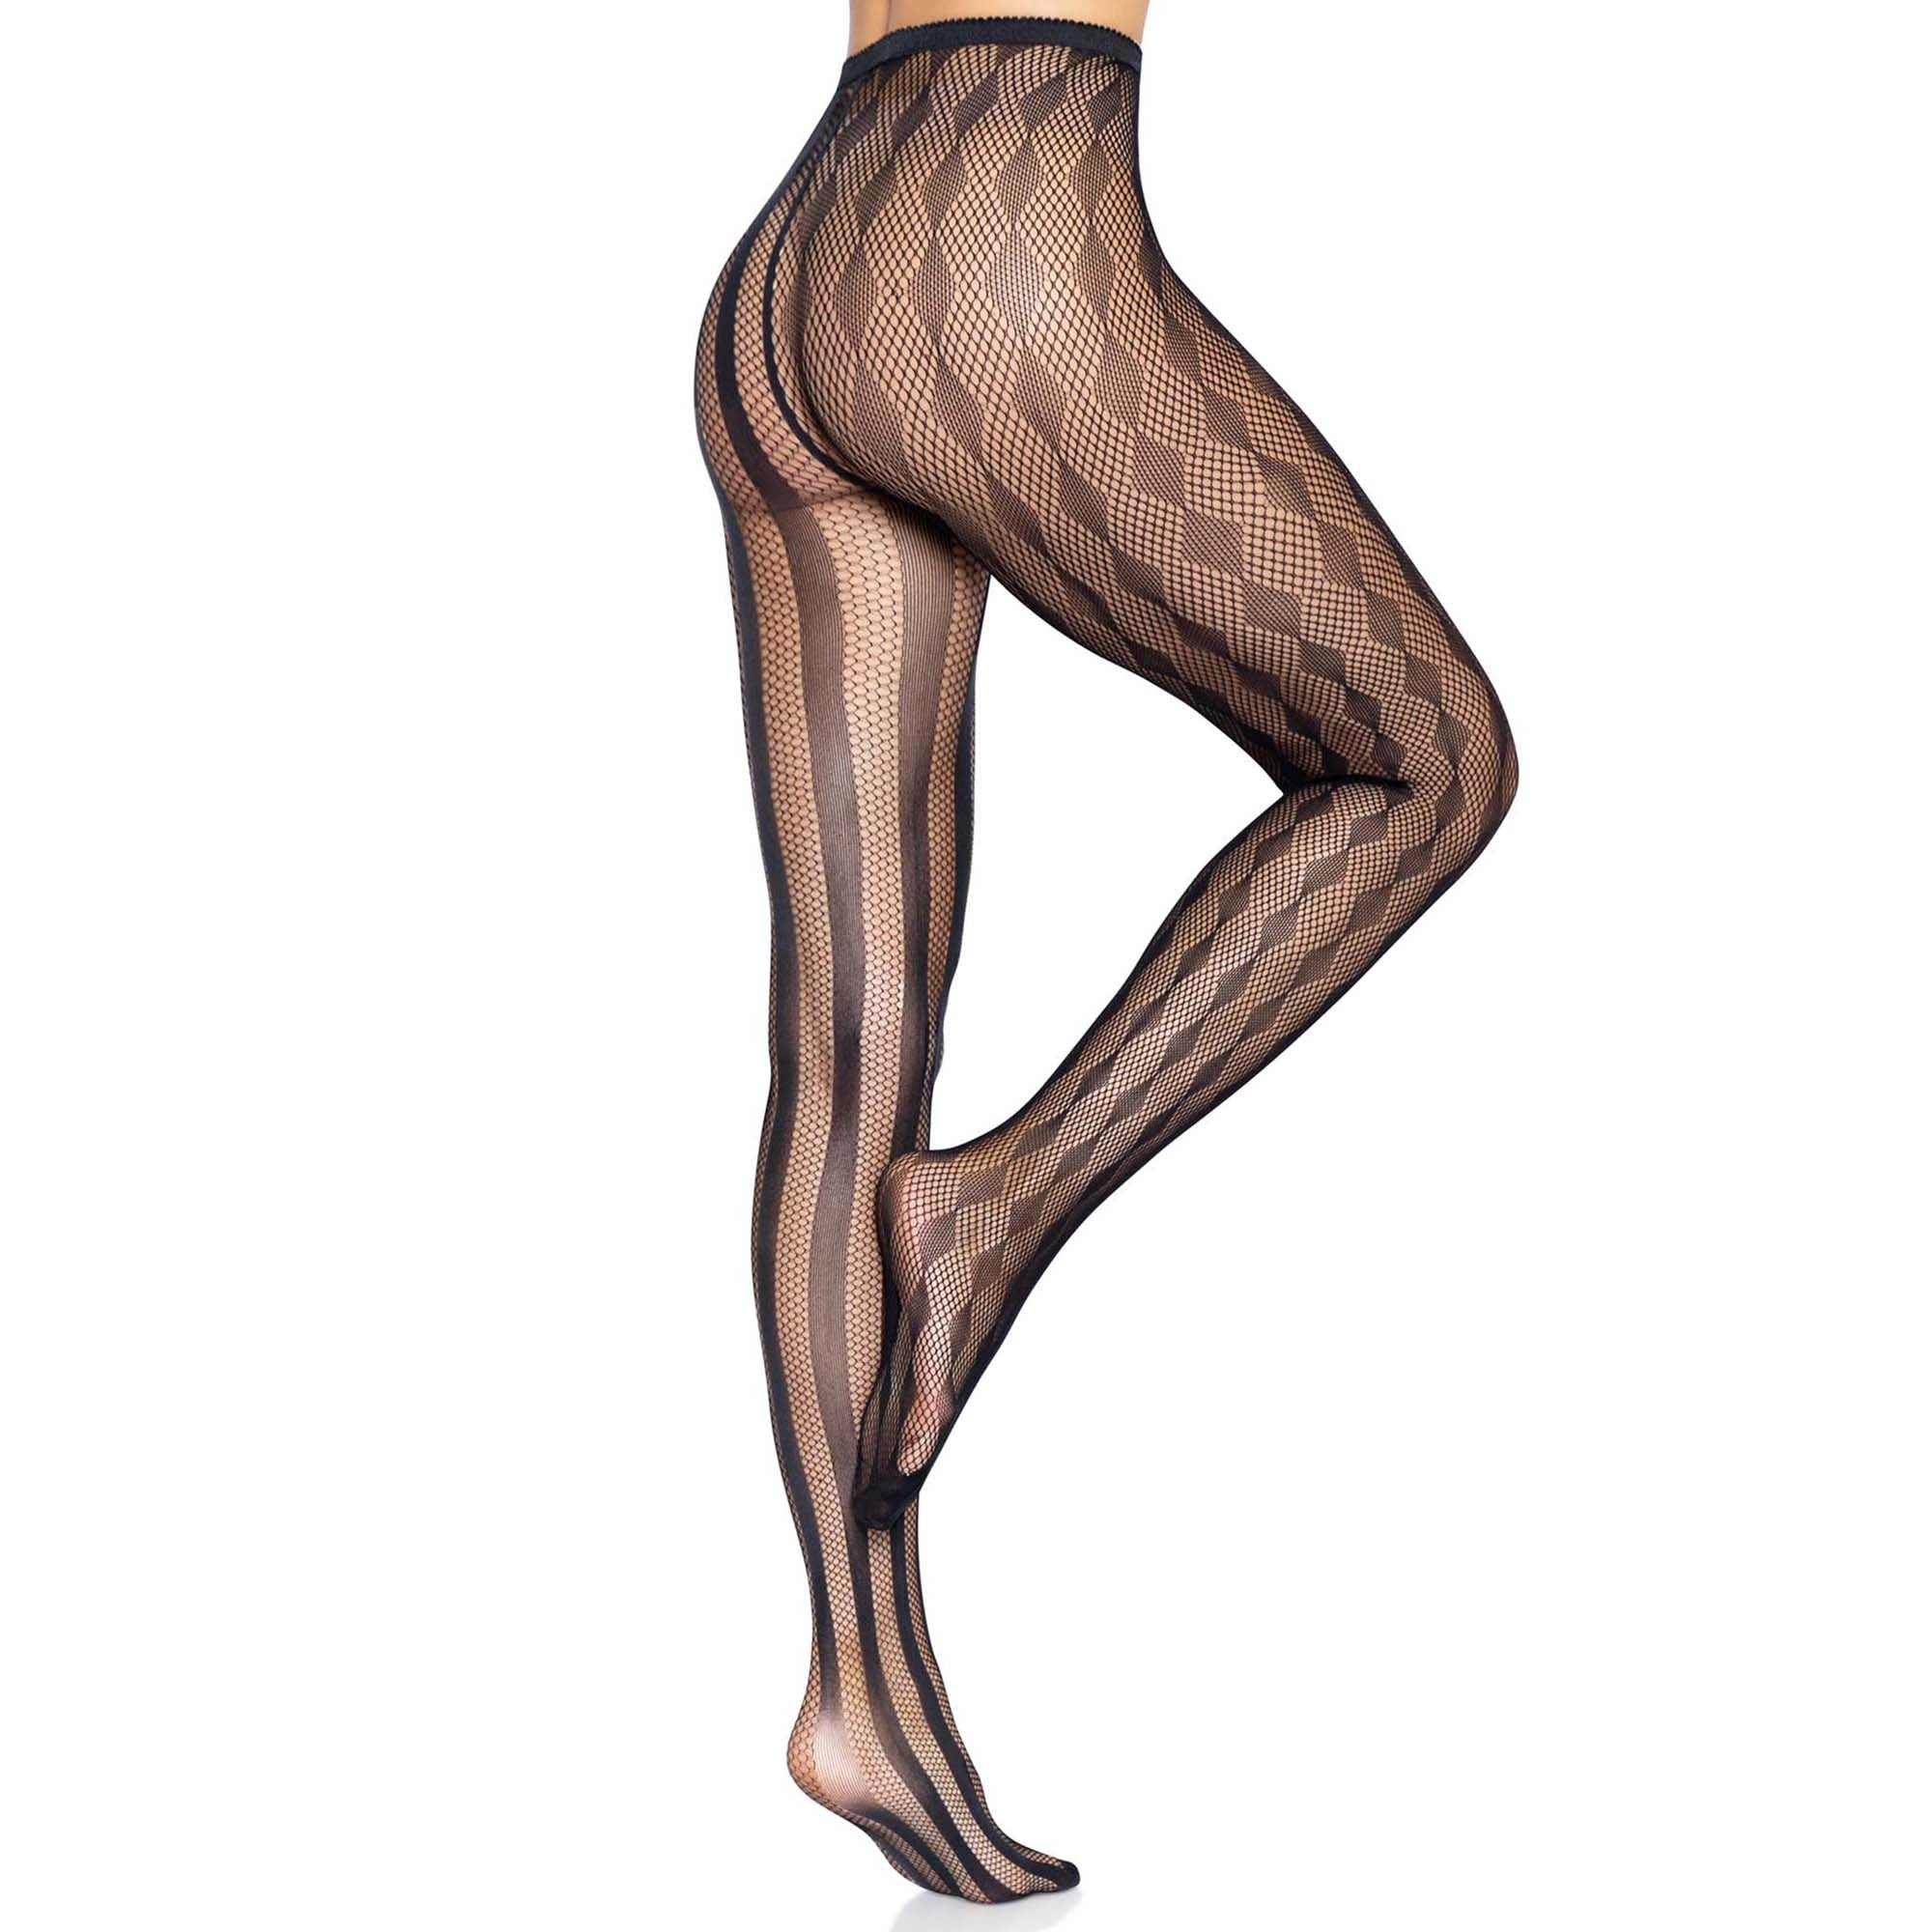 Black Harlequin Net Tights for Adults, 1 Count